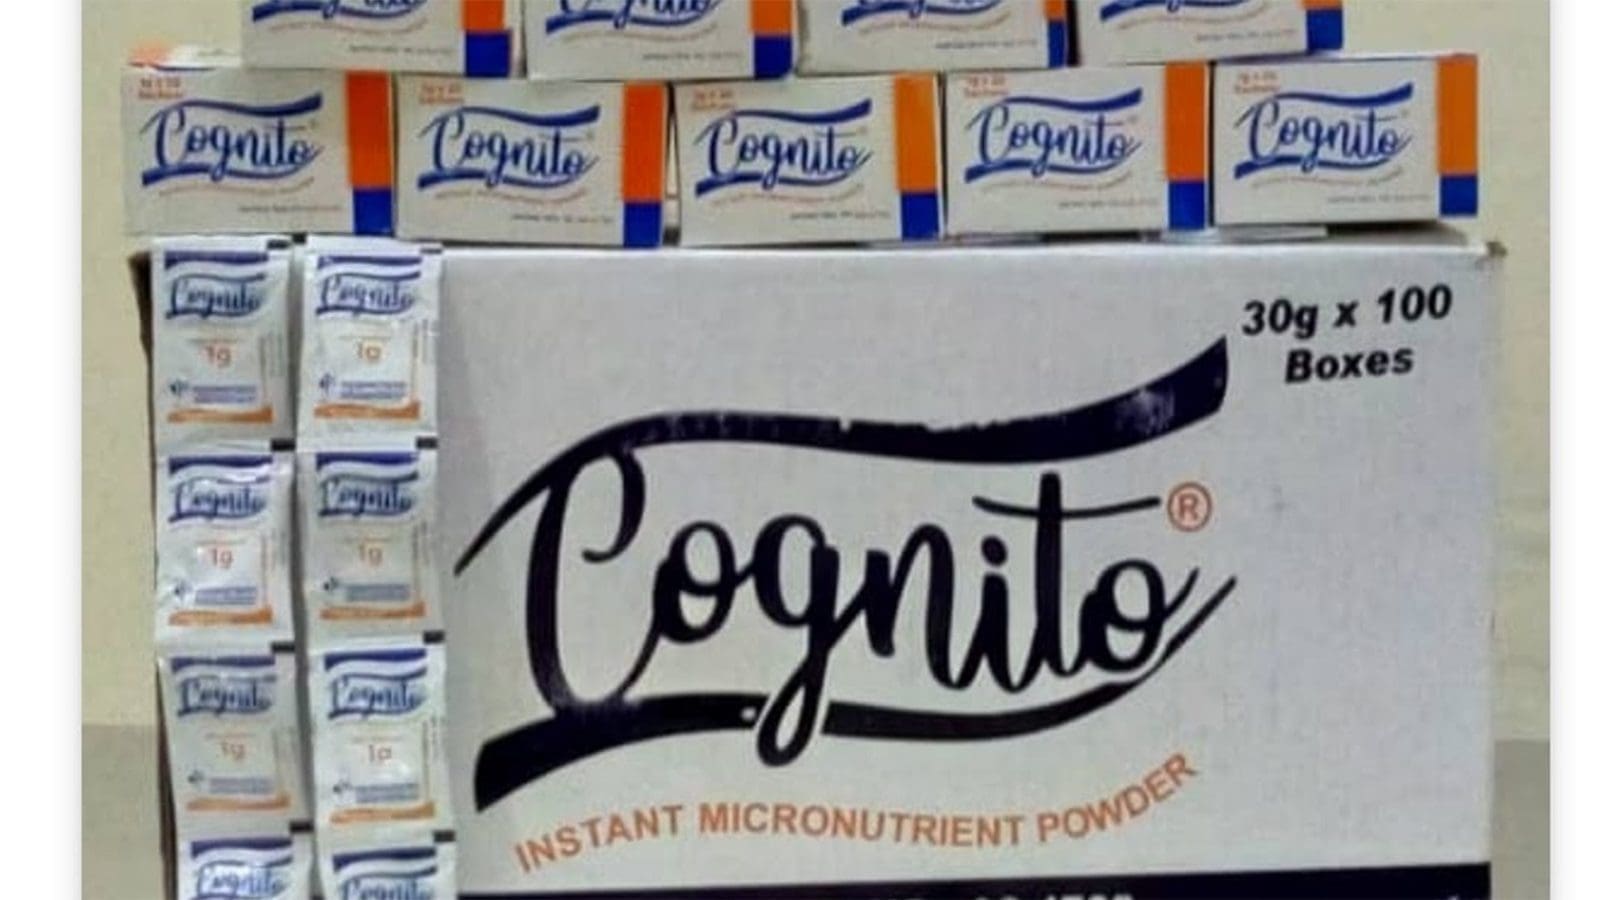 Standards Organisation of Nigeria grants Cognito Instant Micronutrient Powder certification